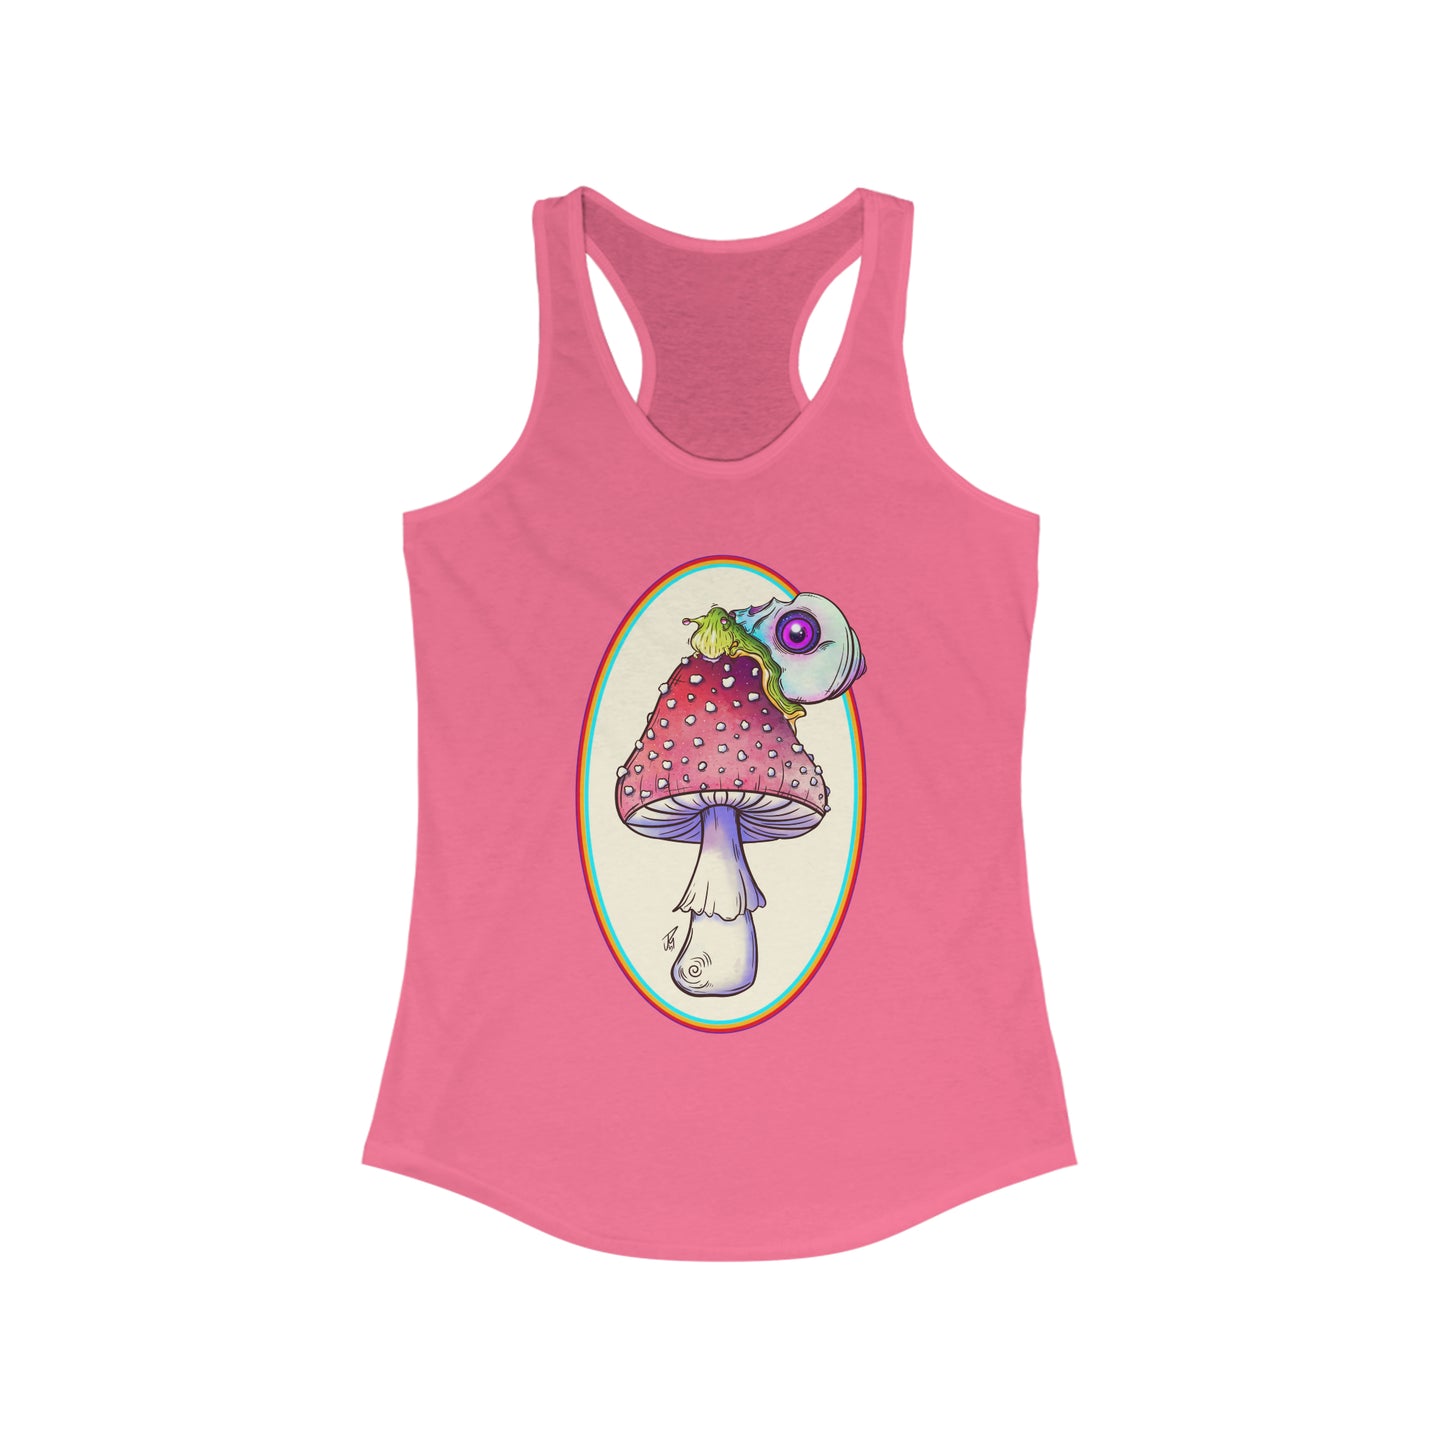 Food for Thought Women's Racerback Tank Tank Top Printify XS Solid Hot Pink 